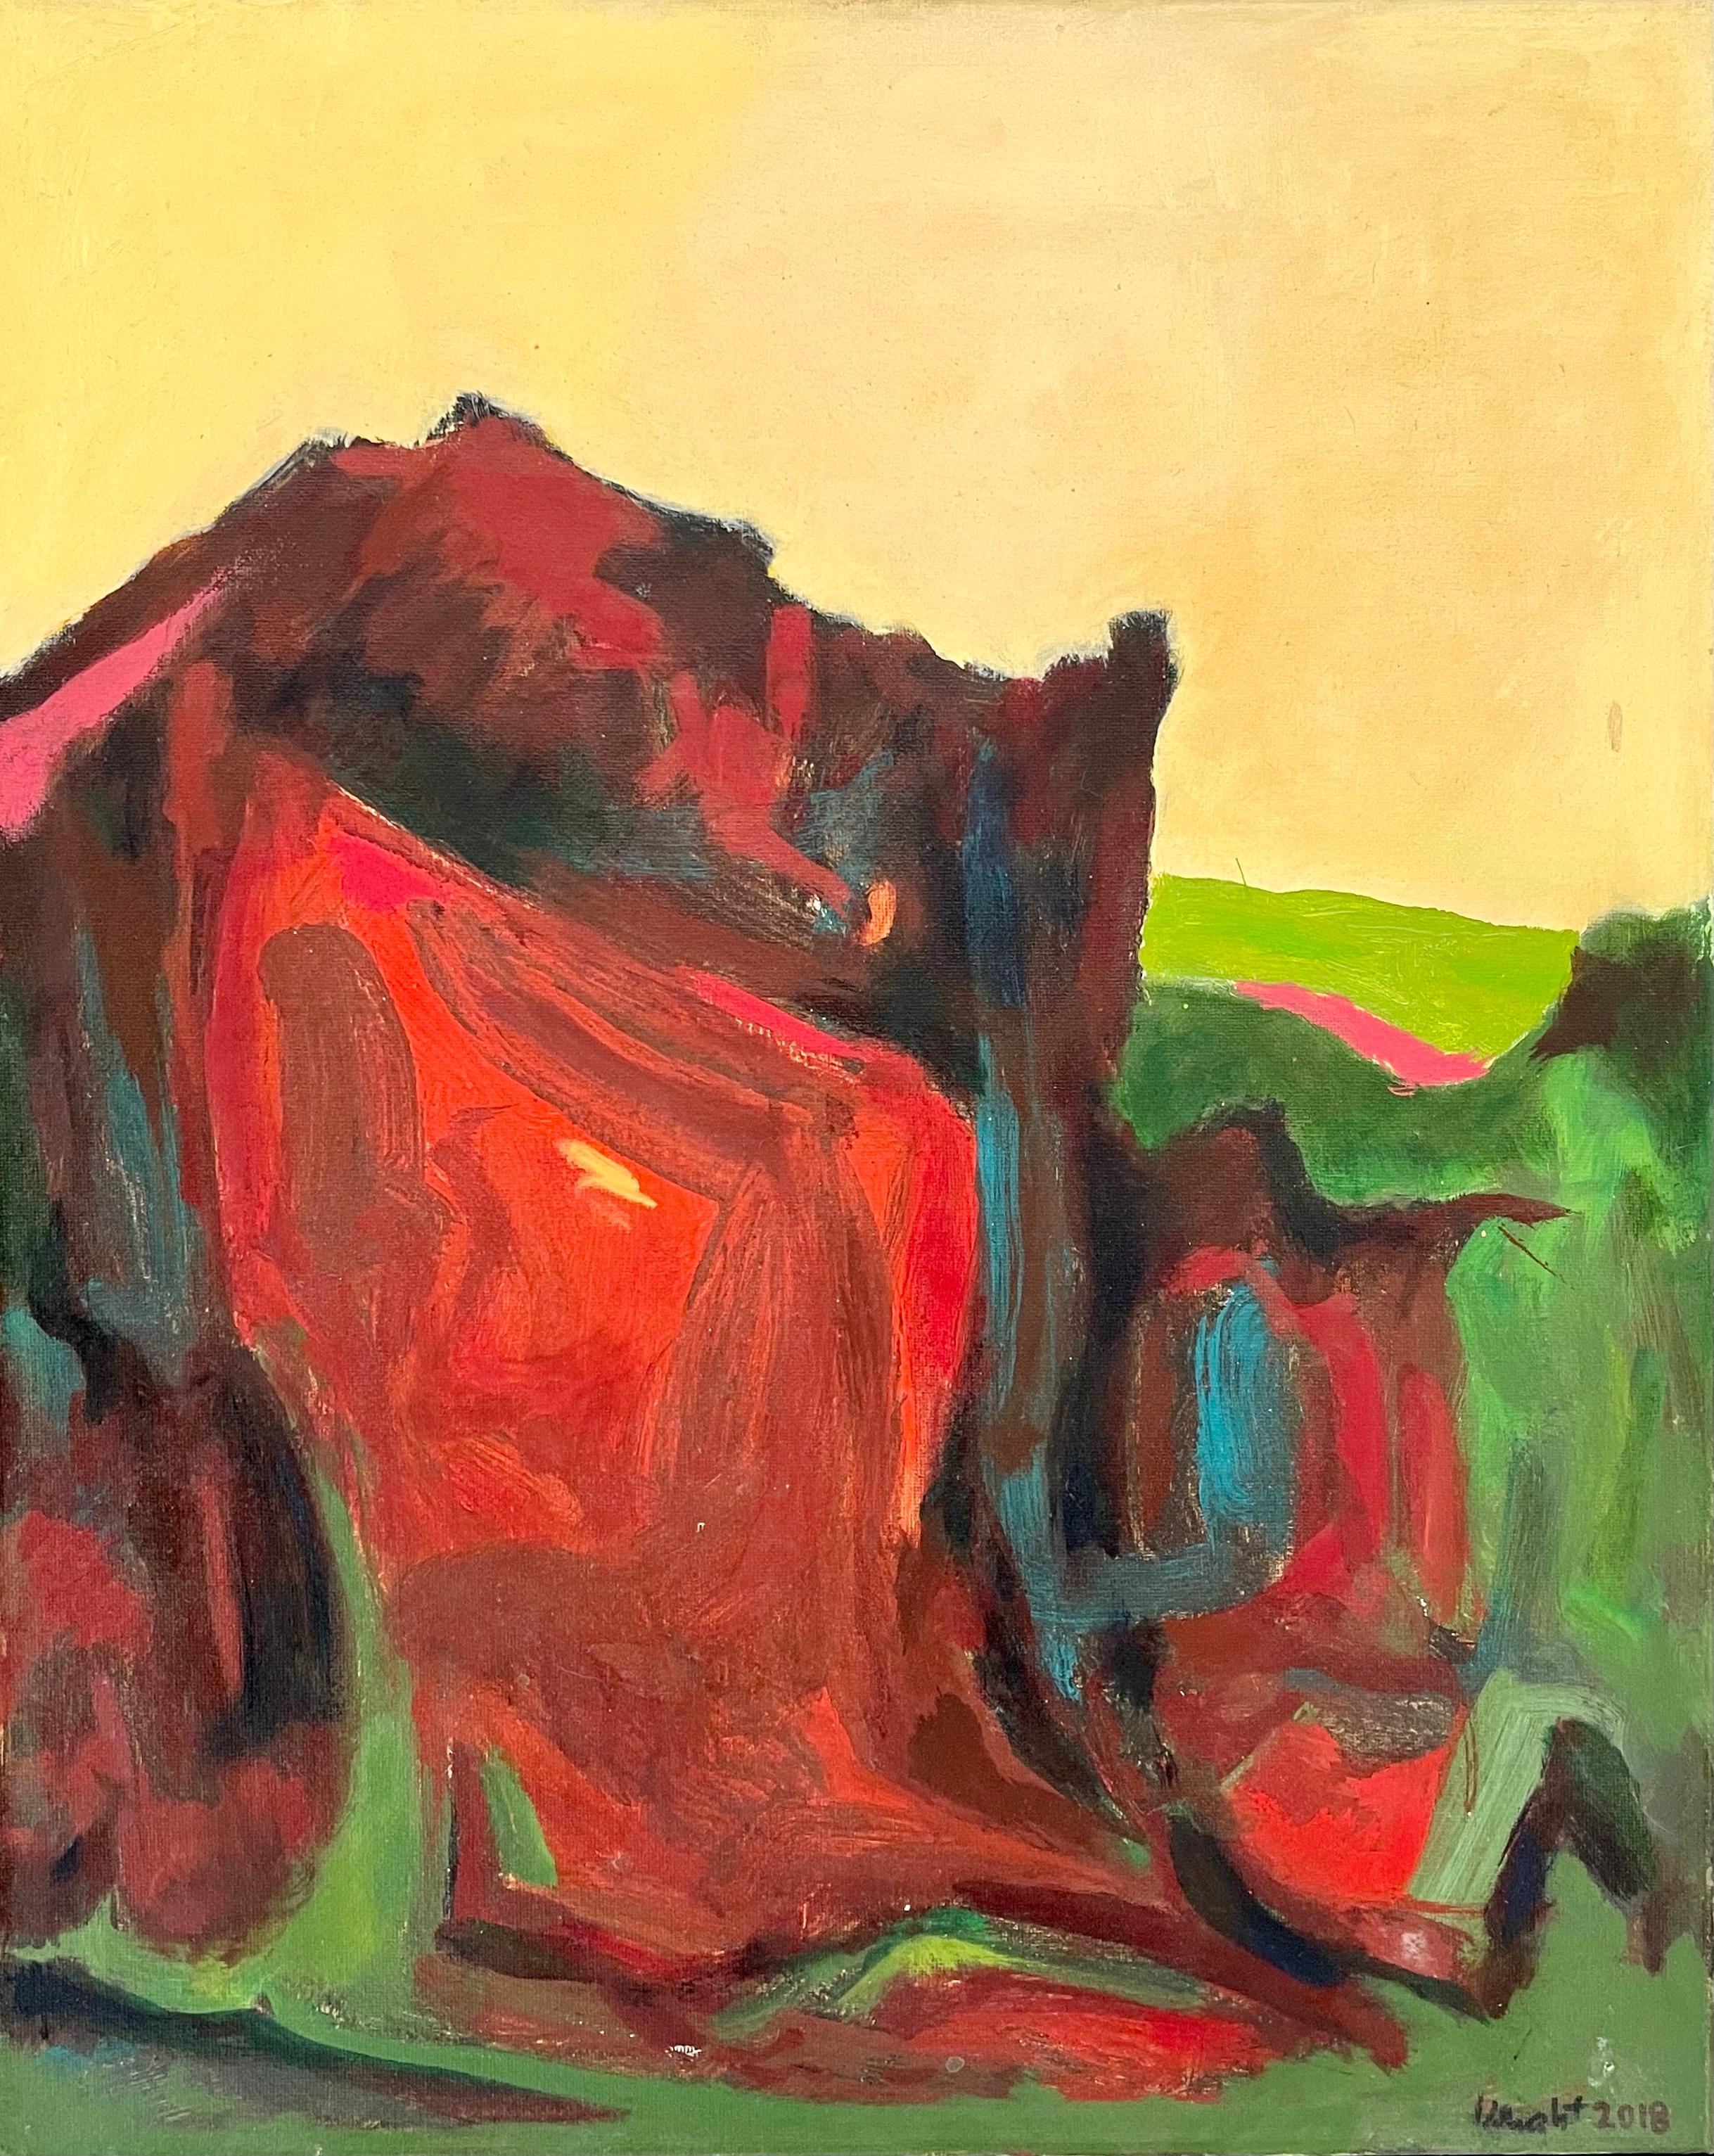 Michael Wright Landscape Painting - Diablo Canyon IV, abstract landscape painting